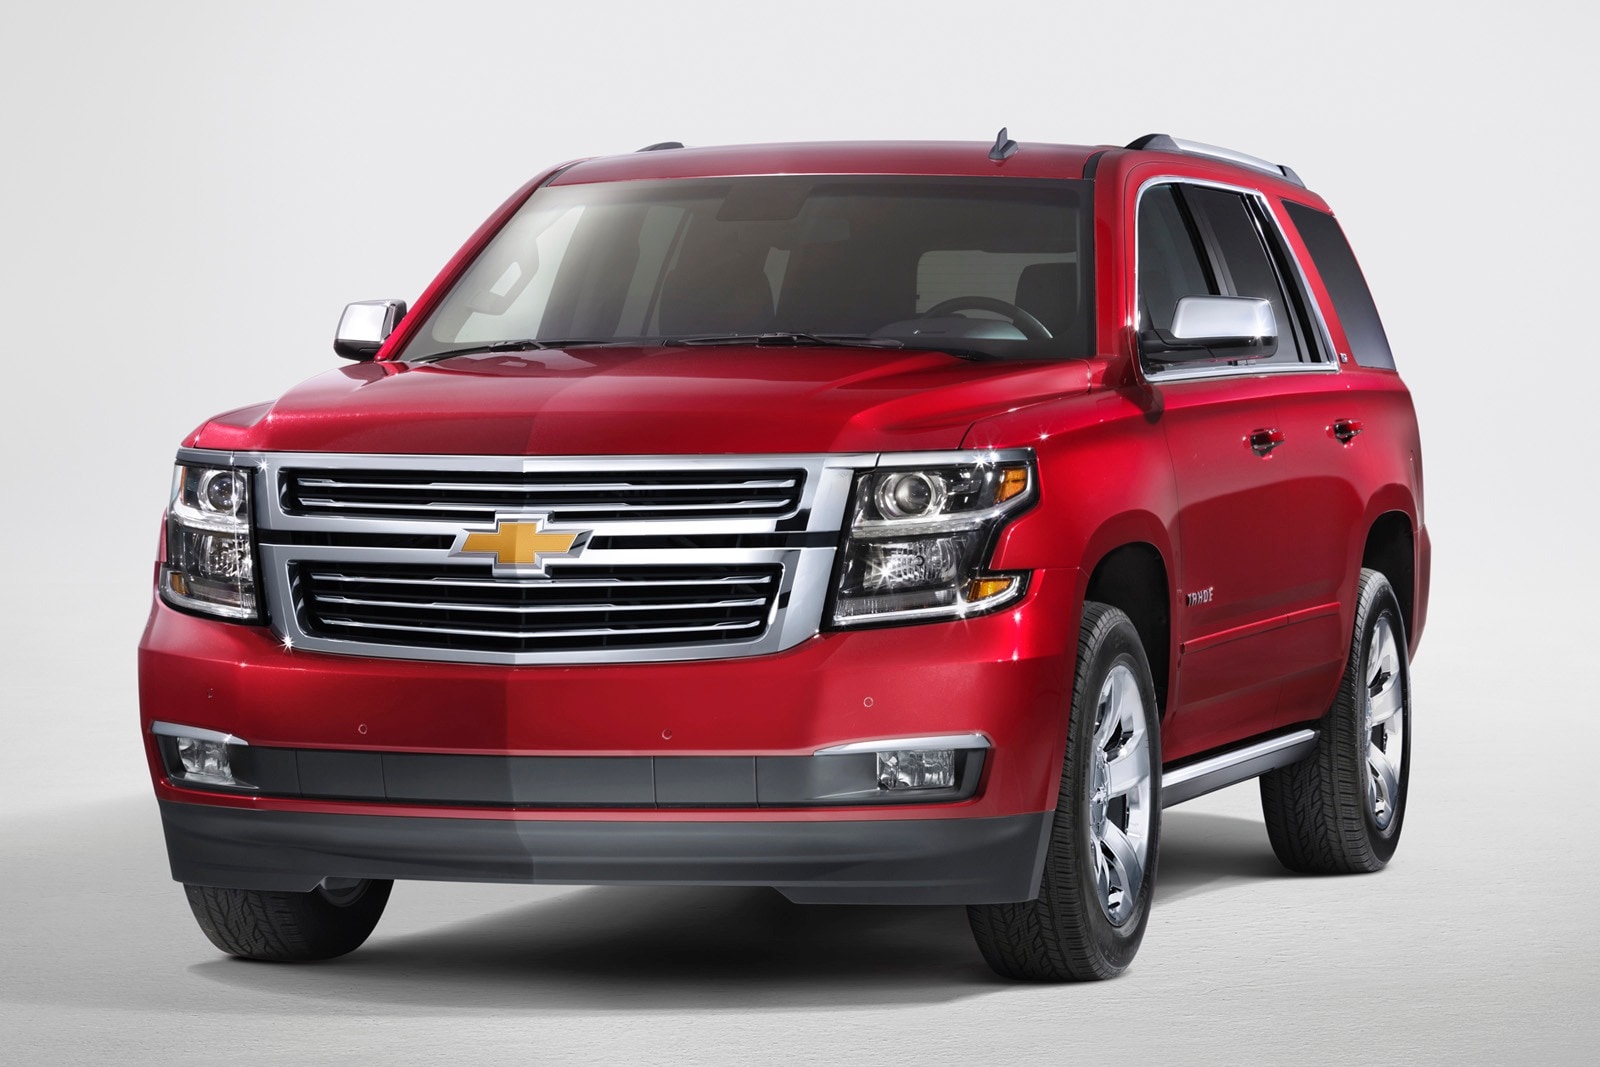 2015 Chevy Tahoe Review & Ratings | Edmunds